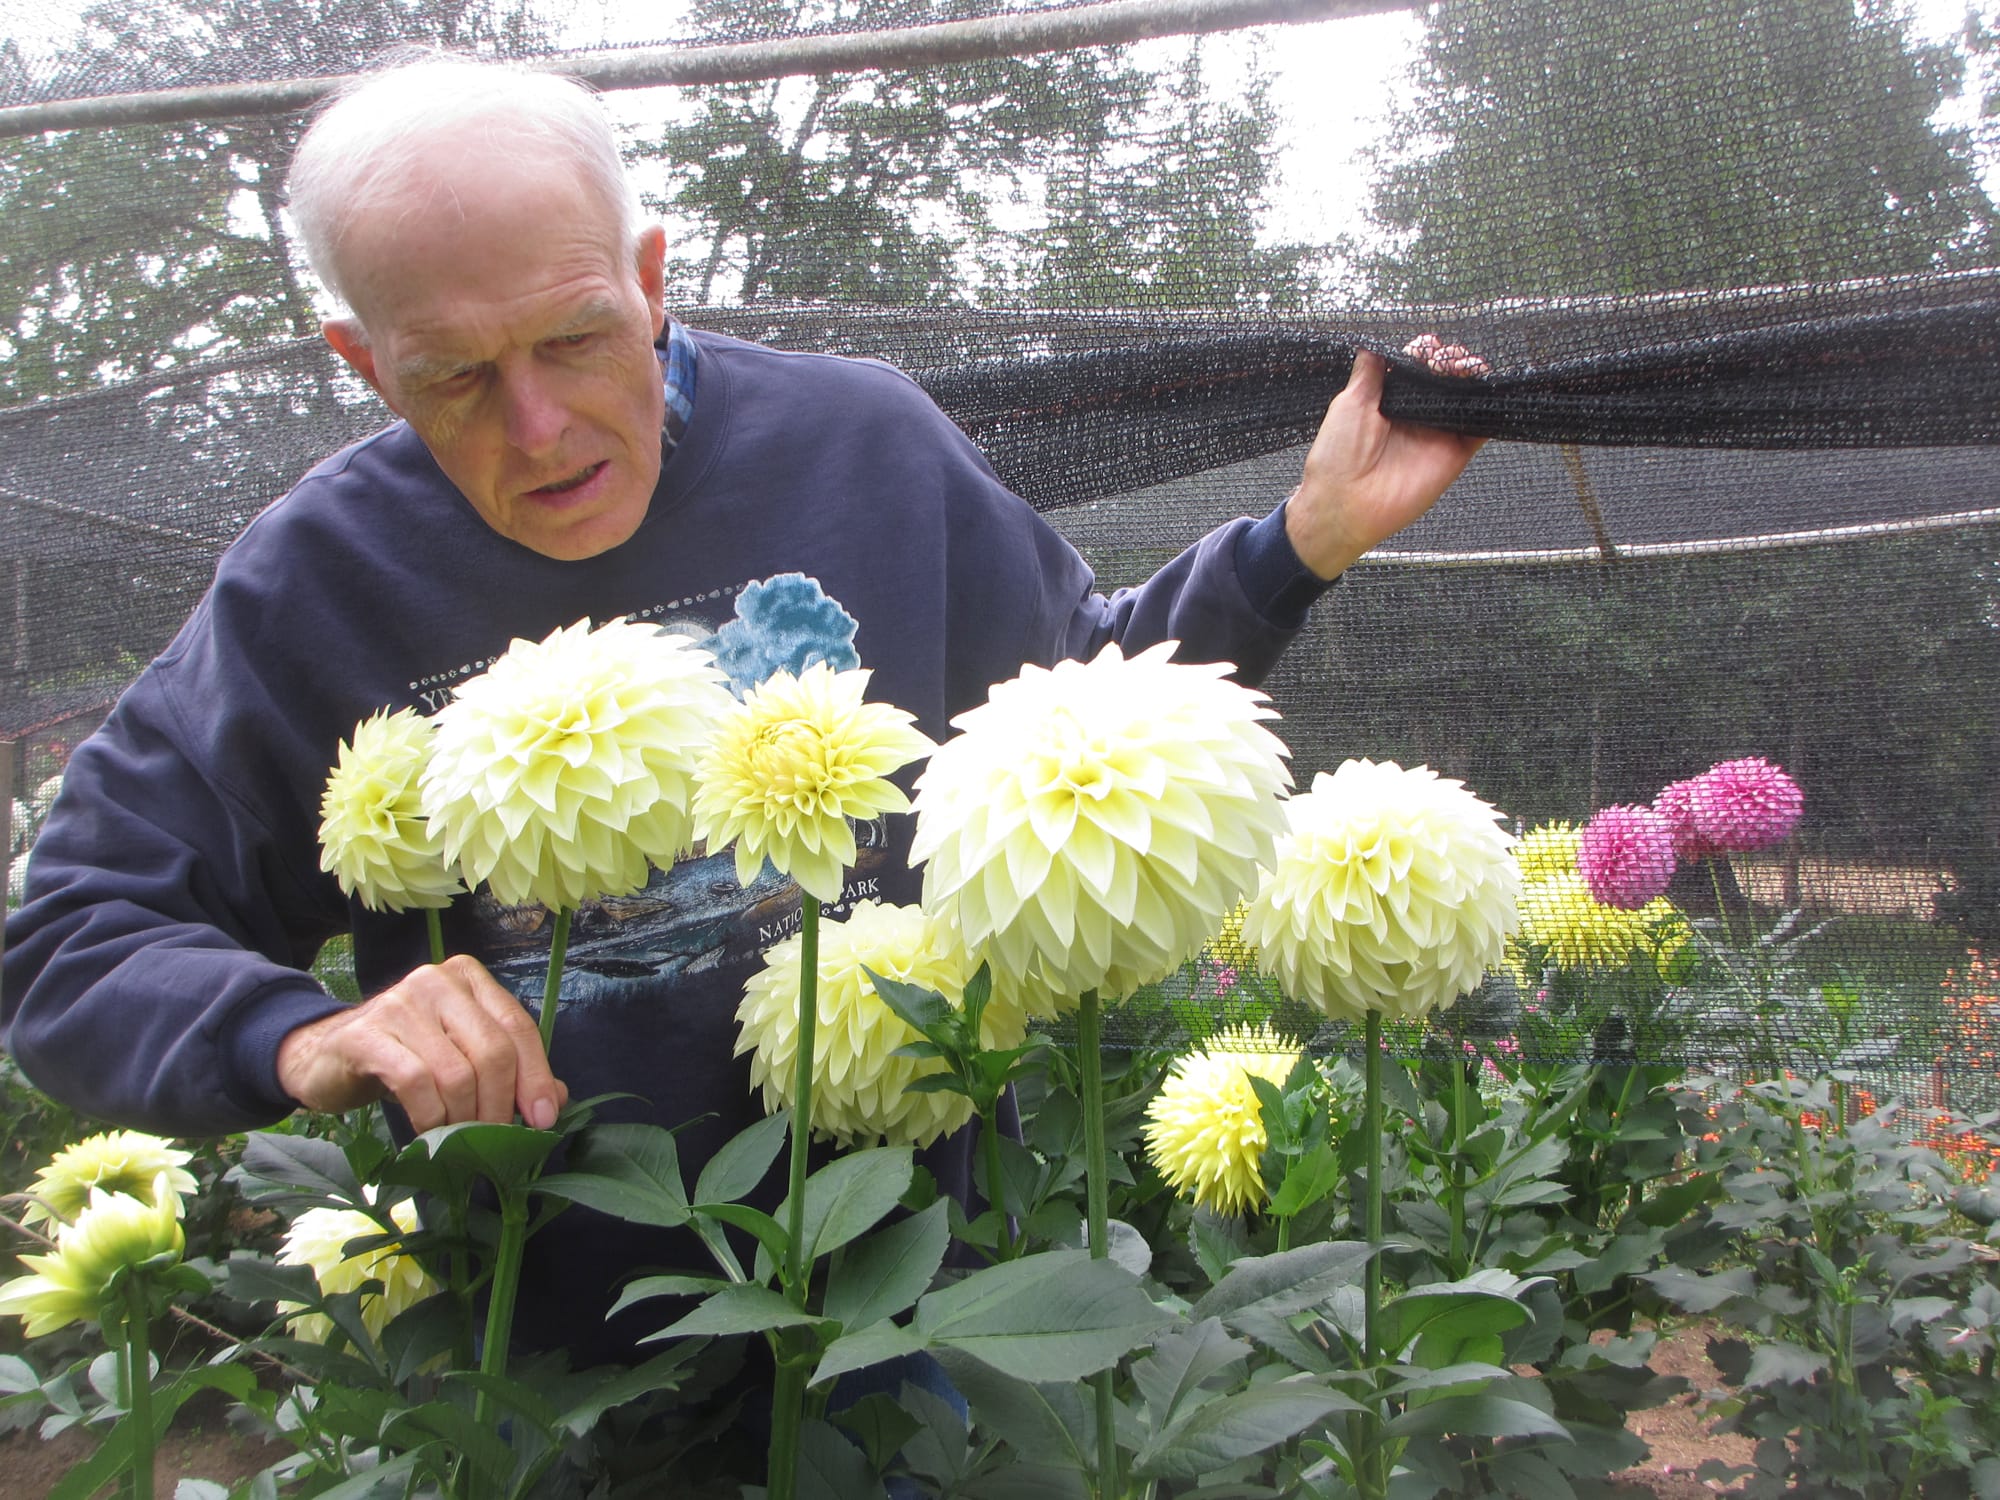 Max Ollieu shows off his Trengrove Millennium dahlias, one of which took &quot;Best in Show&quot; for a fully double bloom at the 2014 National Dahlia Show in Tacoma.